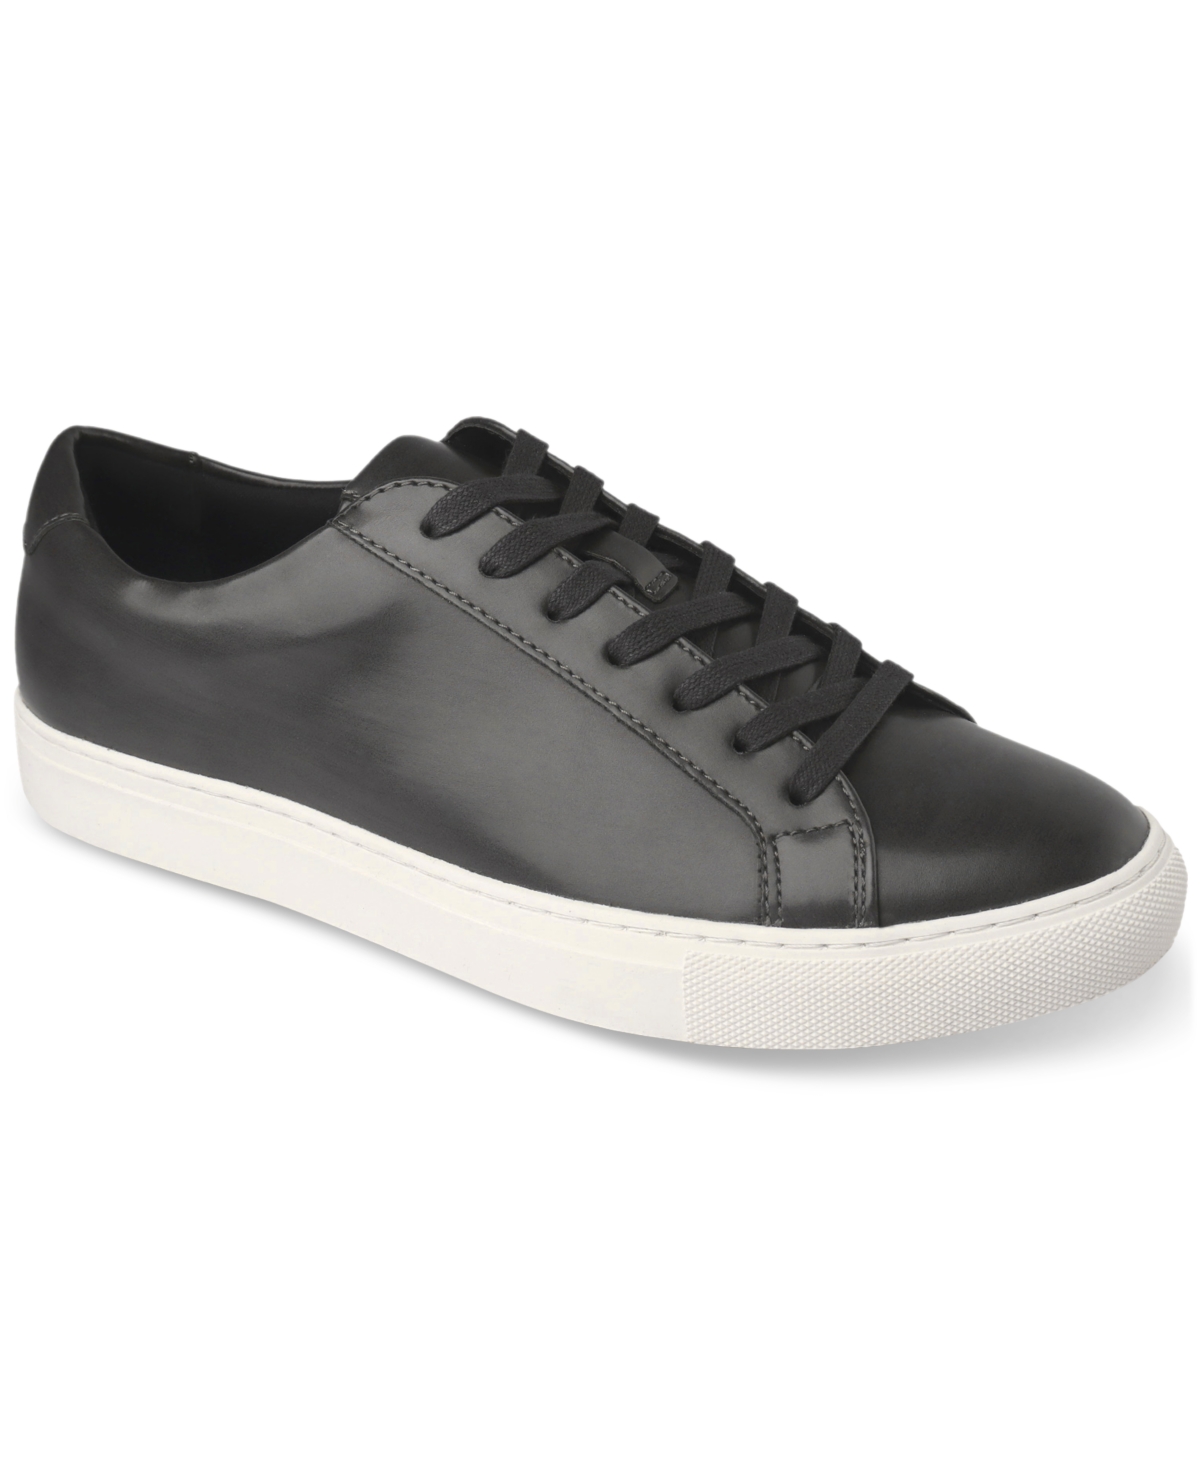 Men's Grayson Lace-Up Sneakers, Created for Macy's - Dark Grey